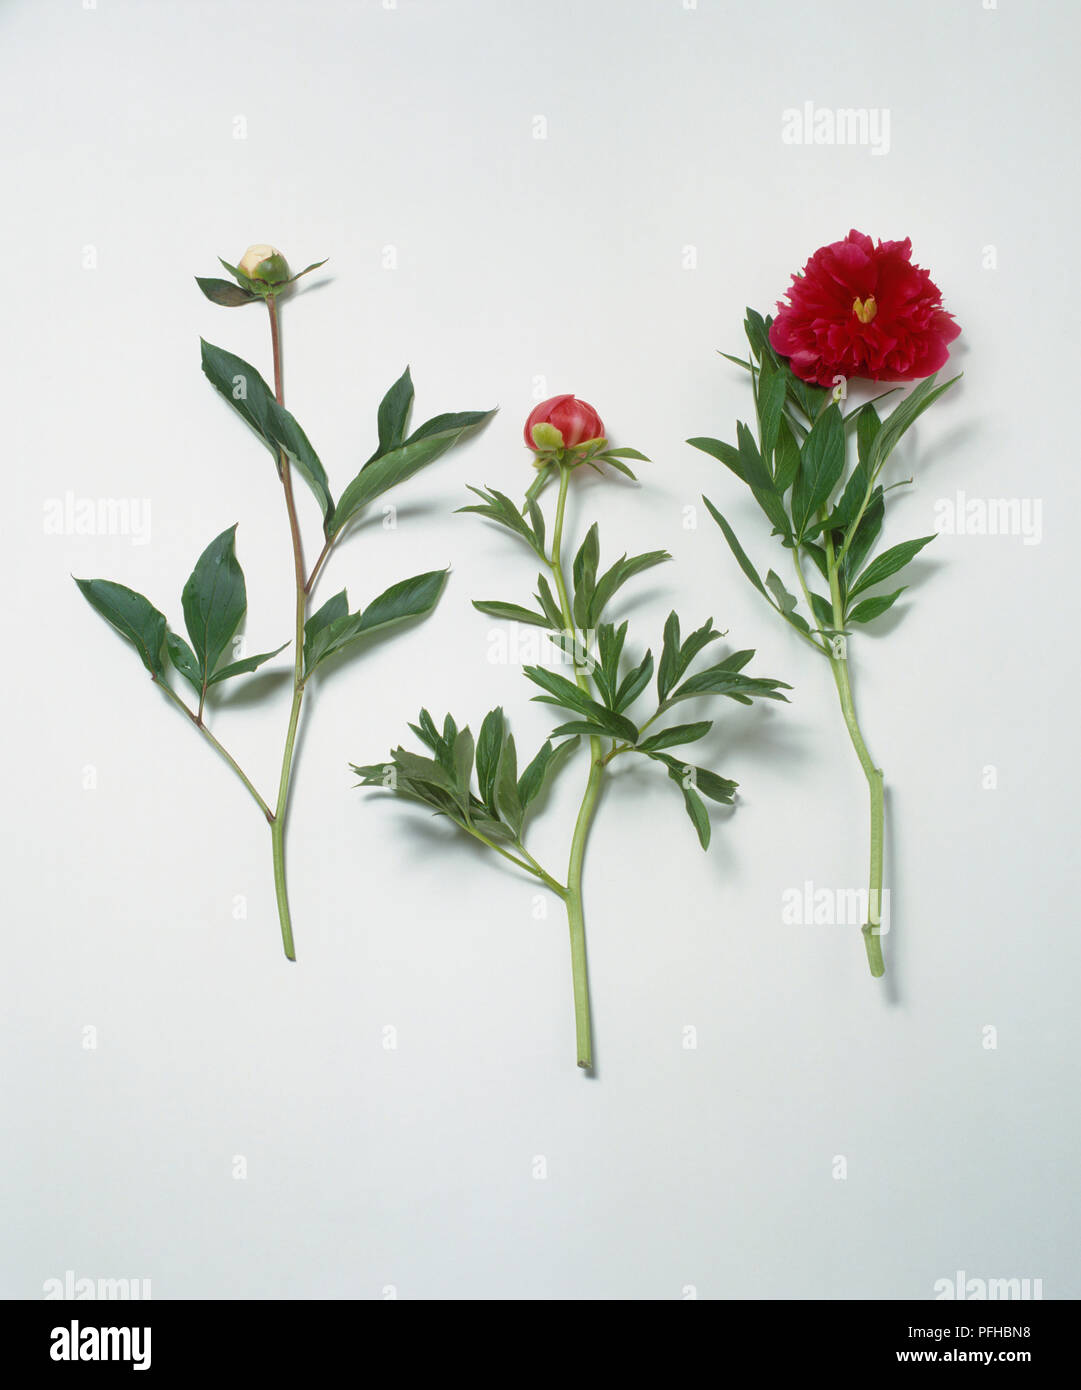 White flower of Paeonia lactiflora (Chinese peony), and two red flowers of Paeonia officinalis (European peony), cuttings Stock Photo